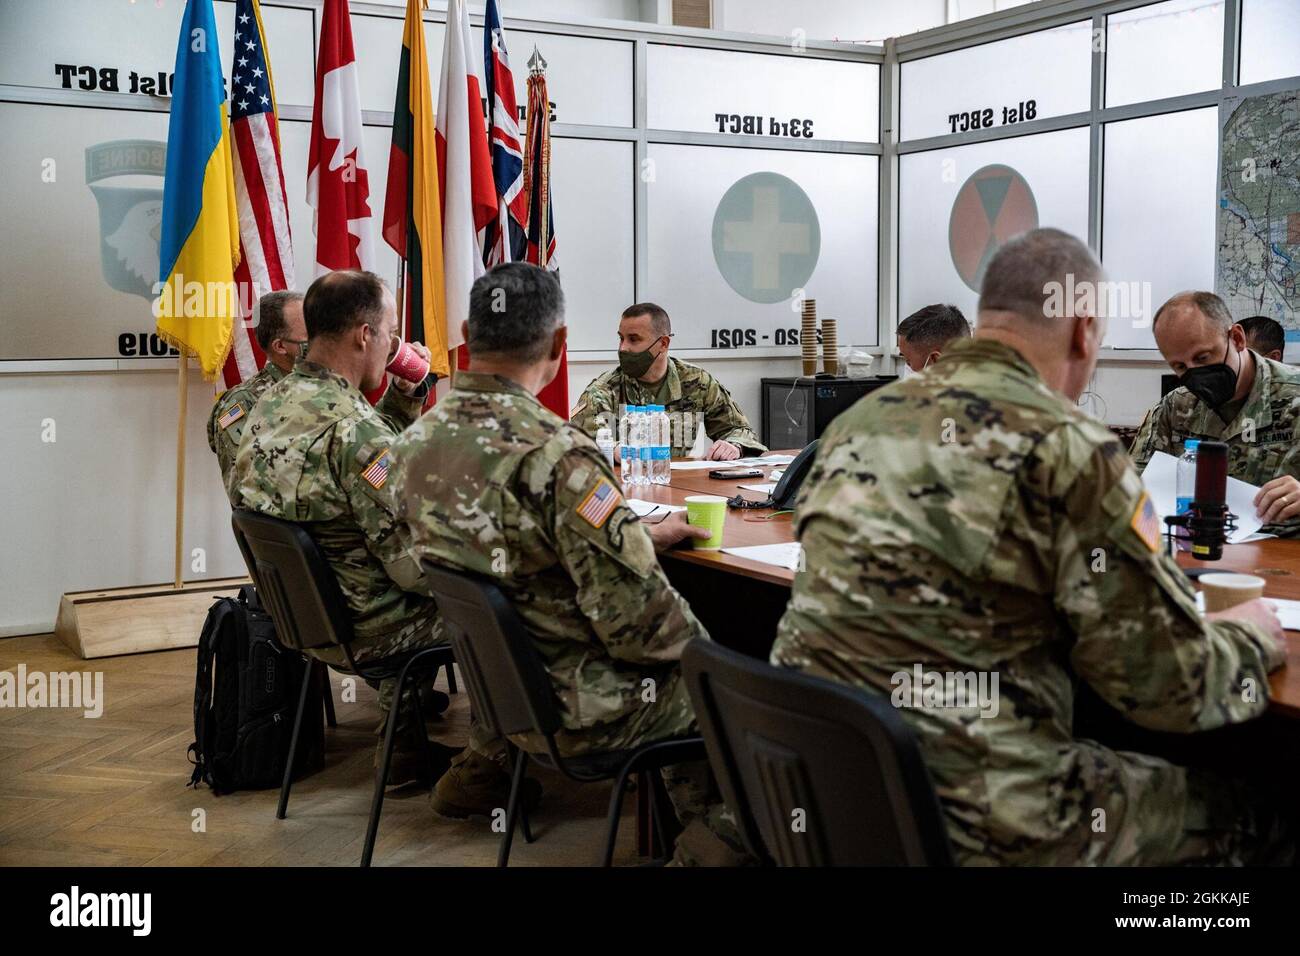 Lt. Gen. John S. Kolasheski, V Corps Commanding General, receives a brief on joint multinational group operations by the command team of Task Force Raven, 81st Stryker Brigade Combat Team, Washington Army National Guard, May 14, 2021, at the International Peacekeeping and Security Center near Yavoriv, Ukraine. Task Force Raven is the command element of the Joint Multinational Training Group-Ukraine, which is responsible for training, advising and mentoring the Ukrainian cadre at the Combat Training Center-Yavoriv to improve Armed Forces Ukraine’s training capacity and defense capabilities.  So Stock Photo